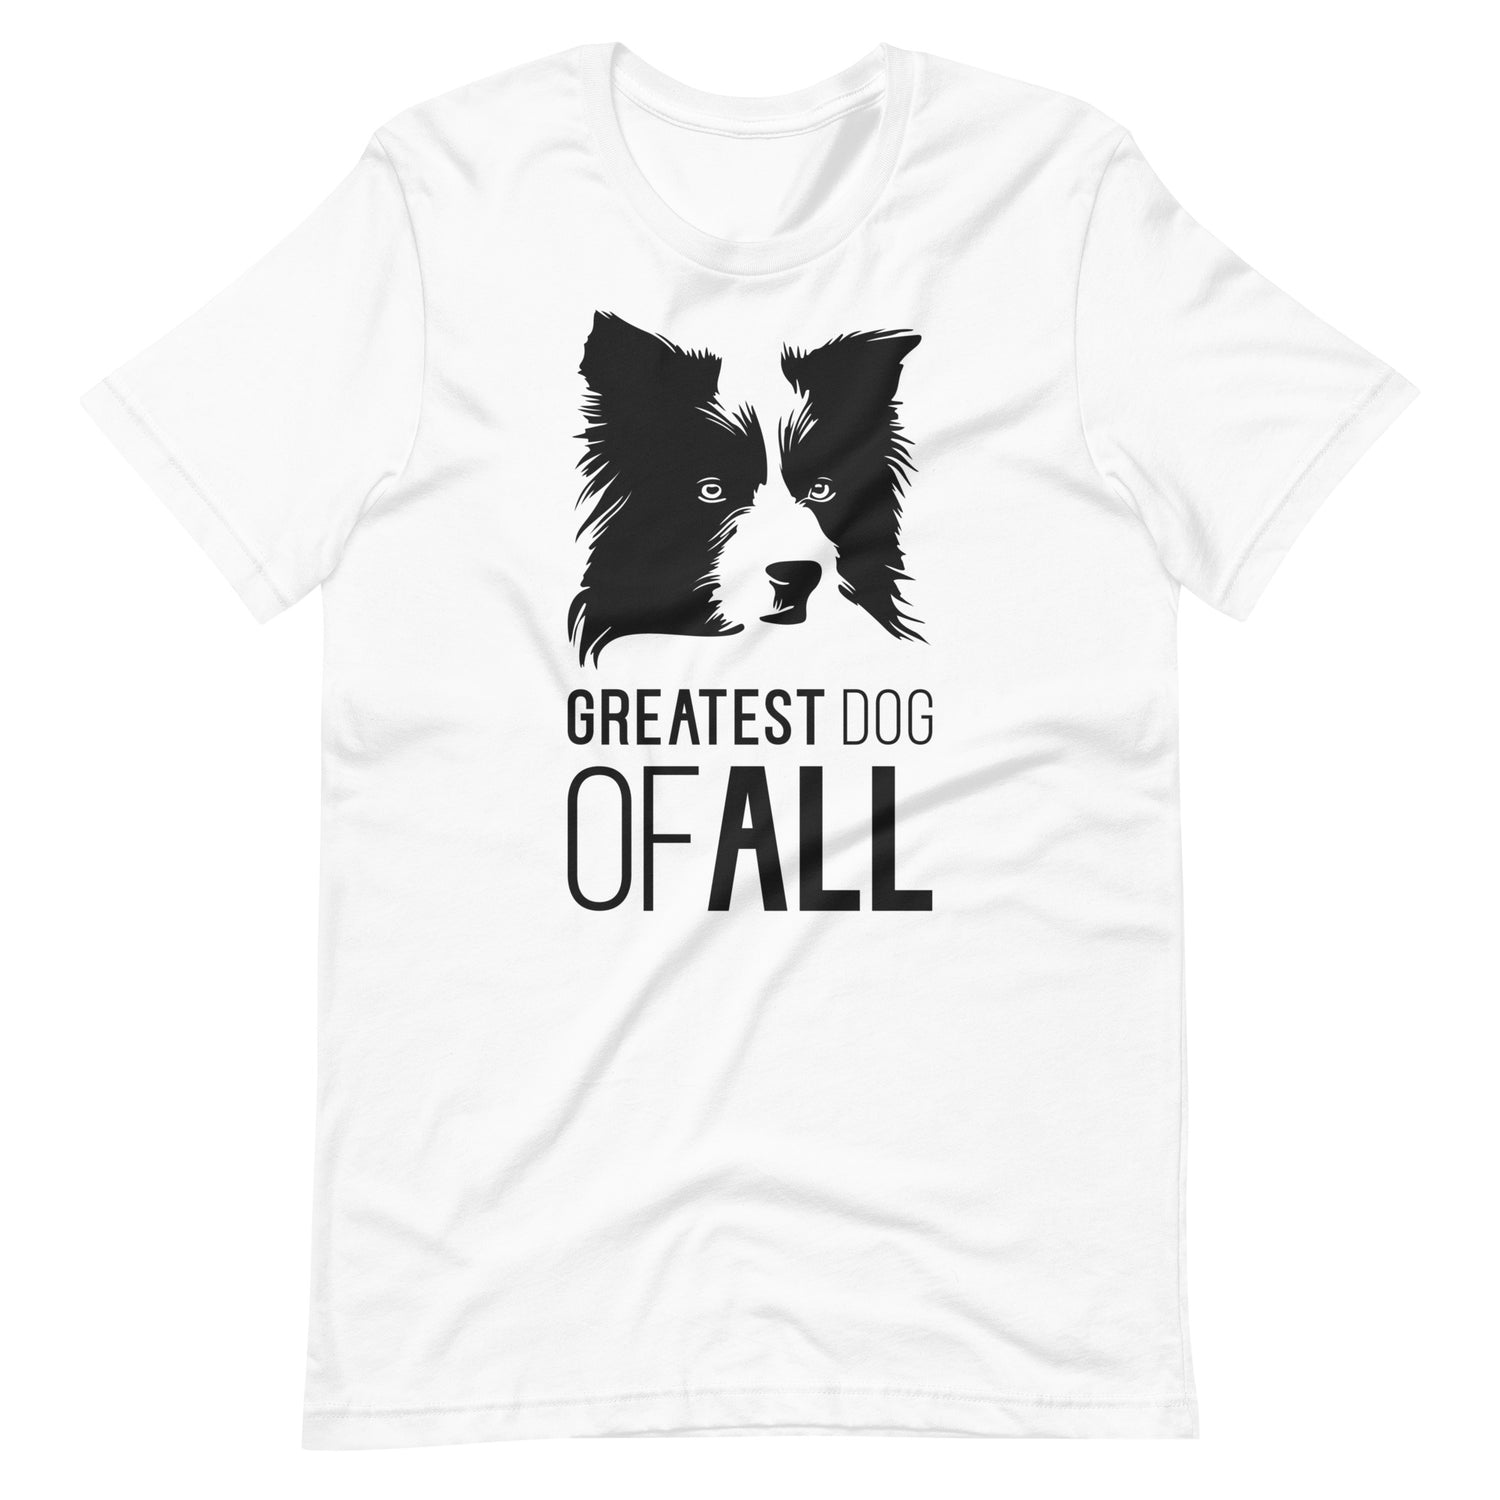 Black Border Collie face silhouette with Greatest Dog of All caption on unisex white t-shirt